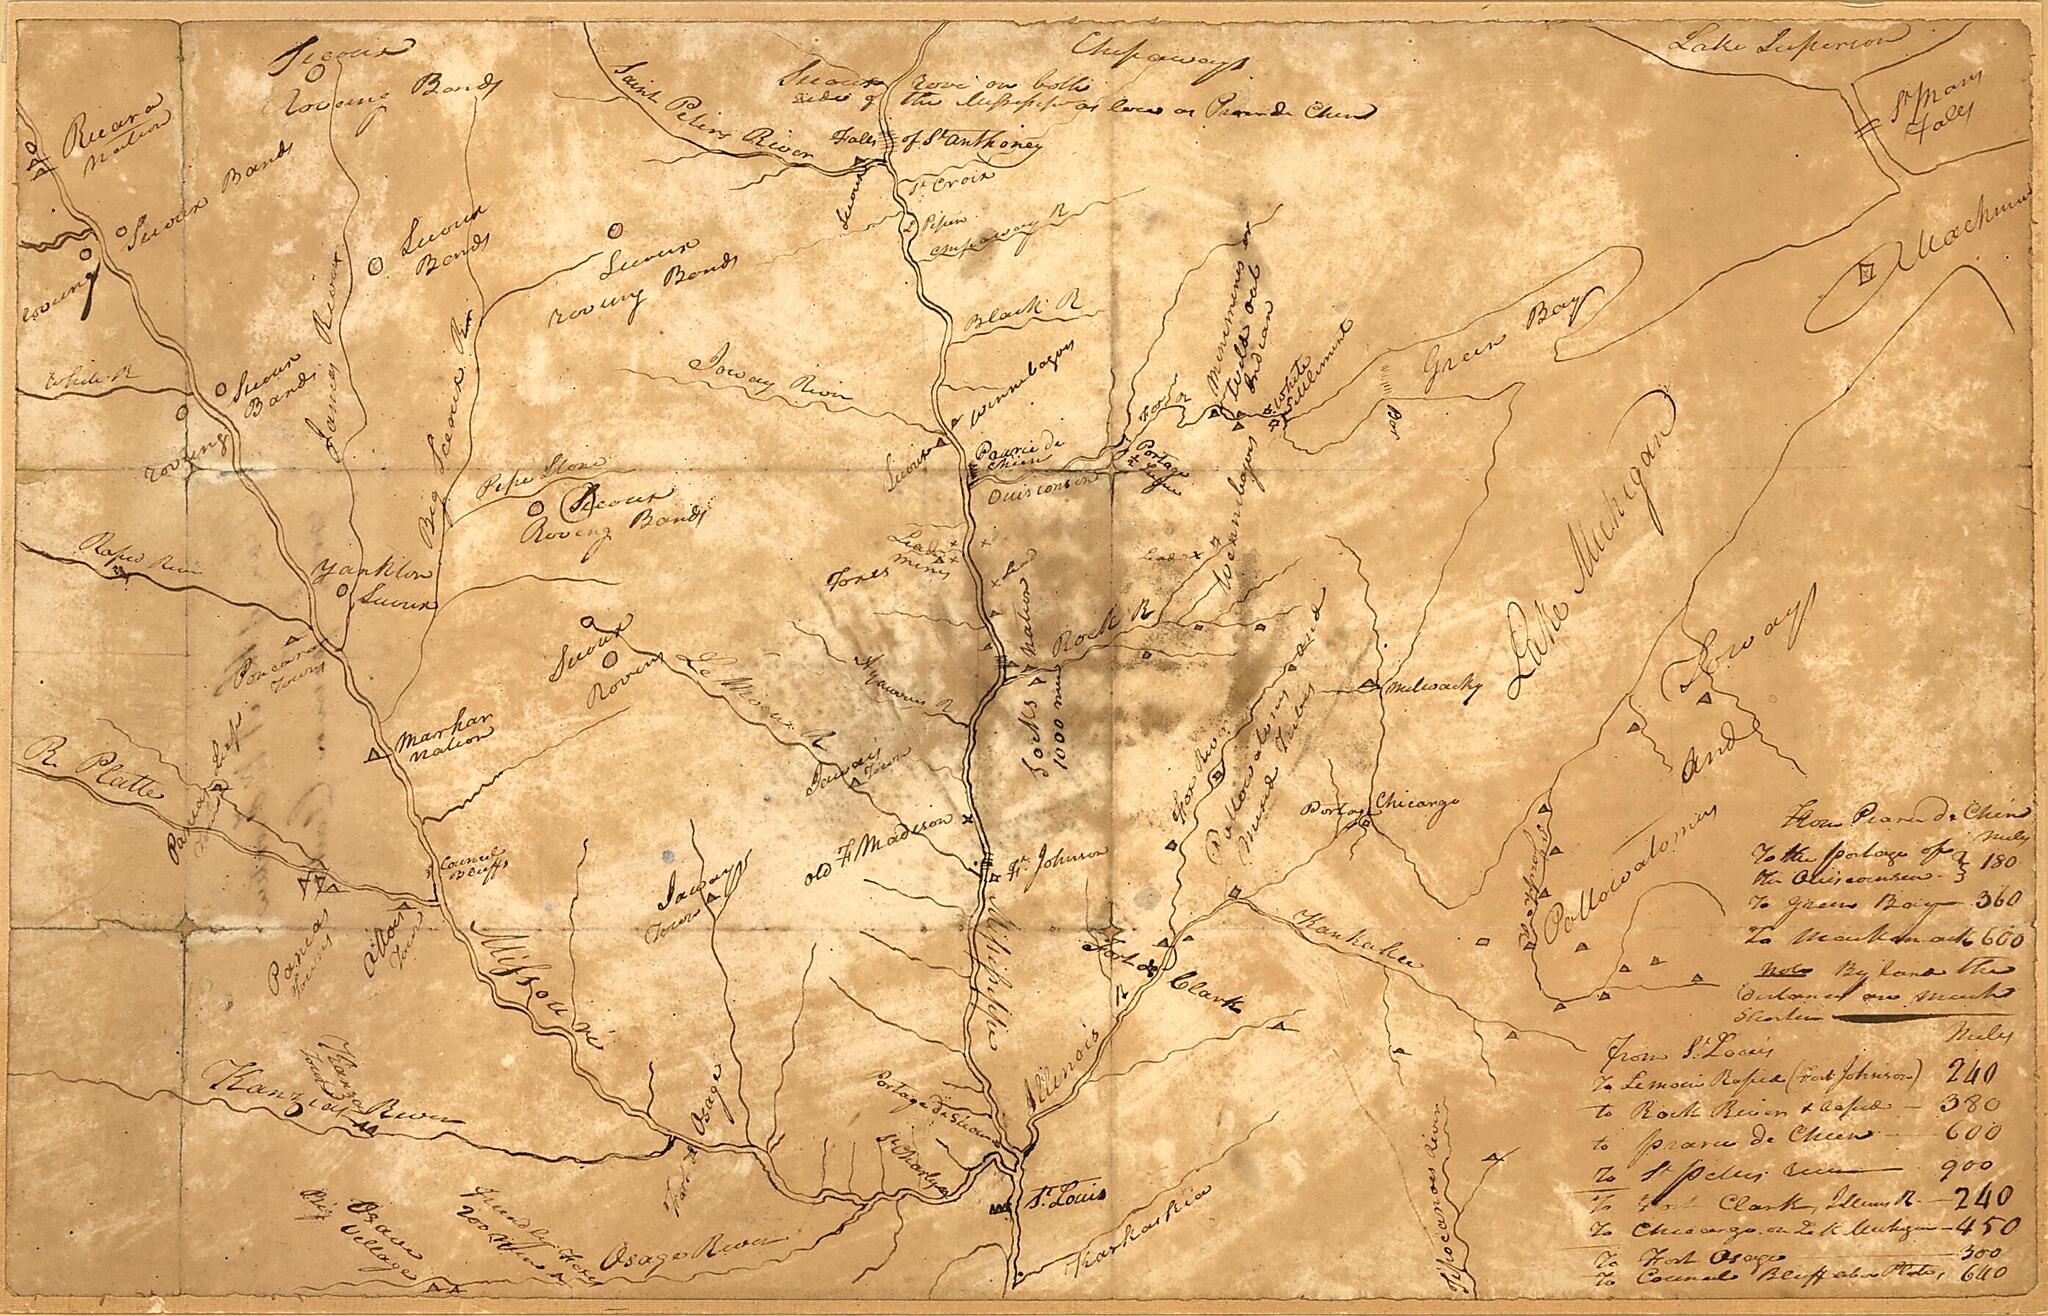 This old map of Plan of the N.W. Frontier (Plan of the Northwest Frontier) from 1813 was created by William Clark in 1813